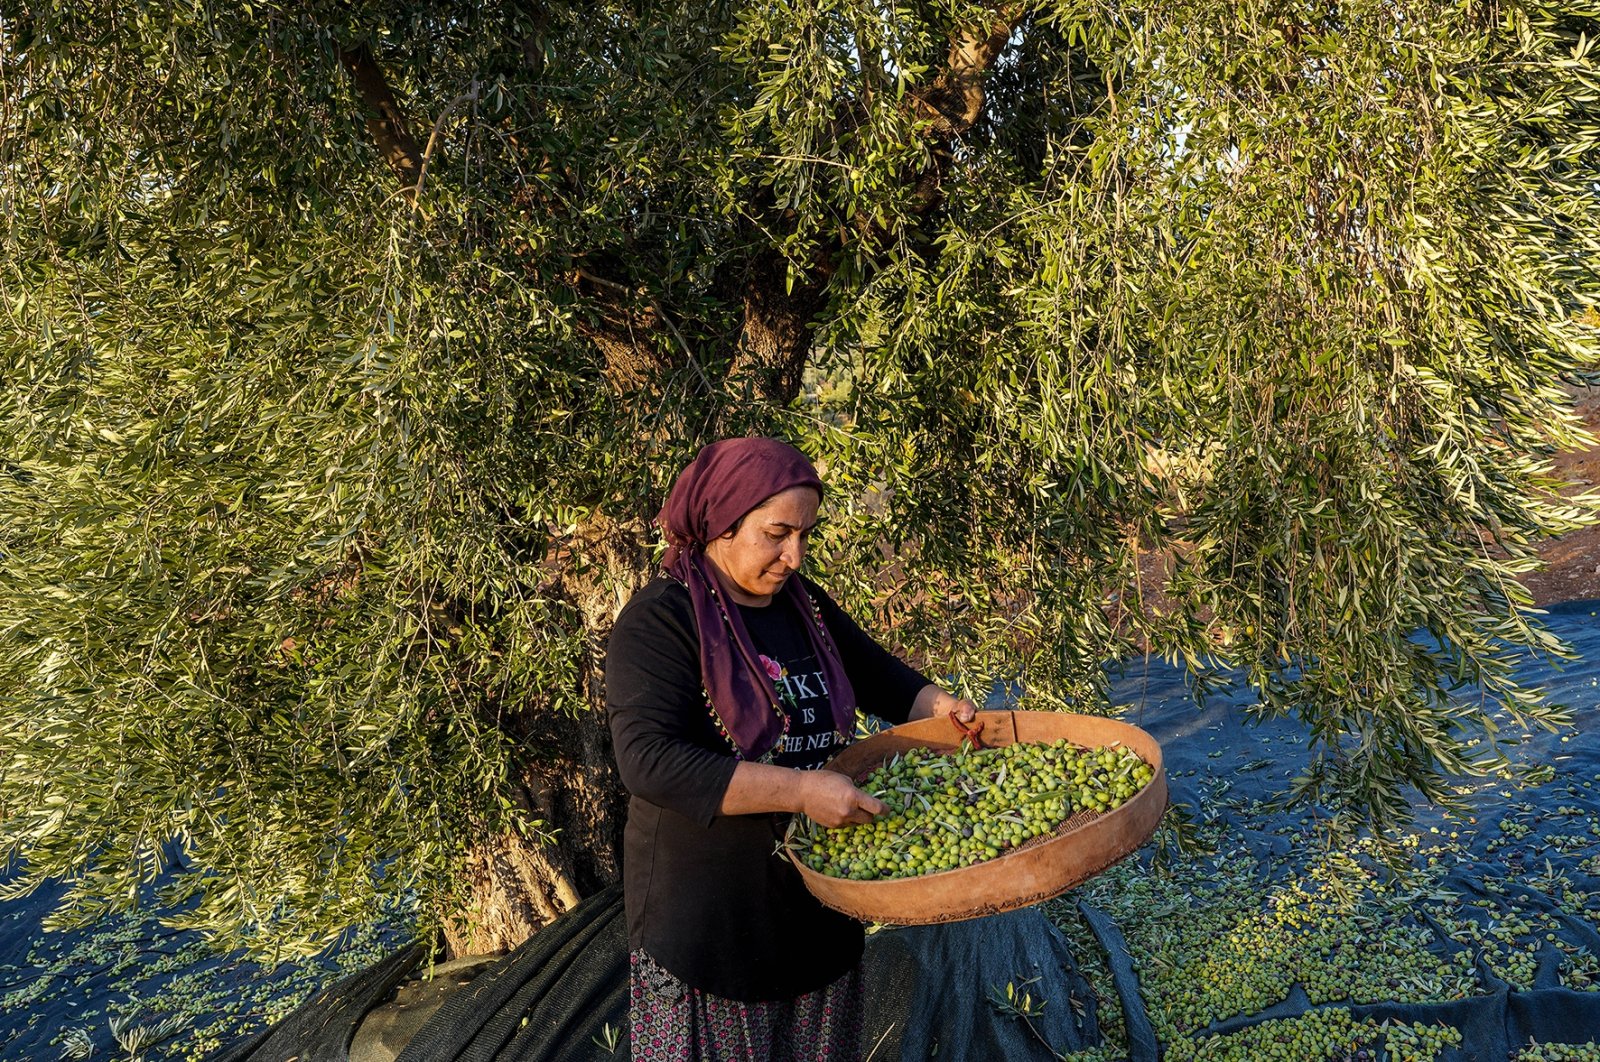 A woman places olives she picked on a sieve, in Kilis, southern Turkey, Oct. 27, 2021. (PHOTO BY UĞUR YILDIRIM) 